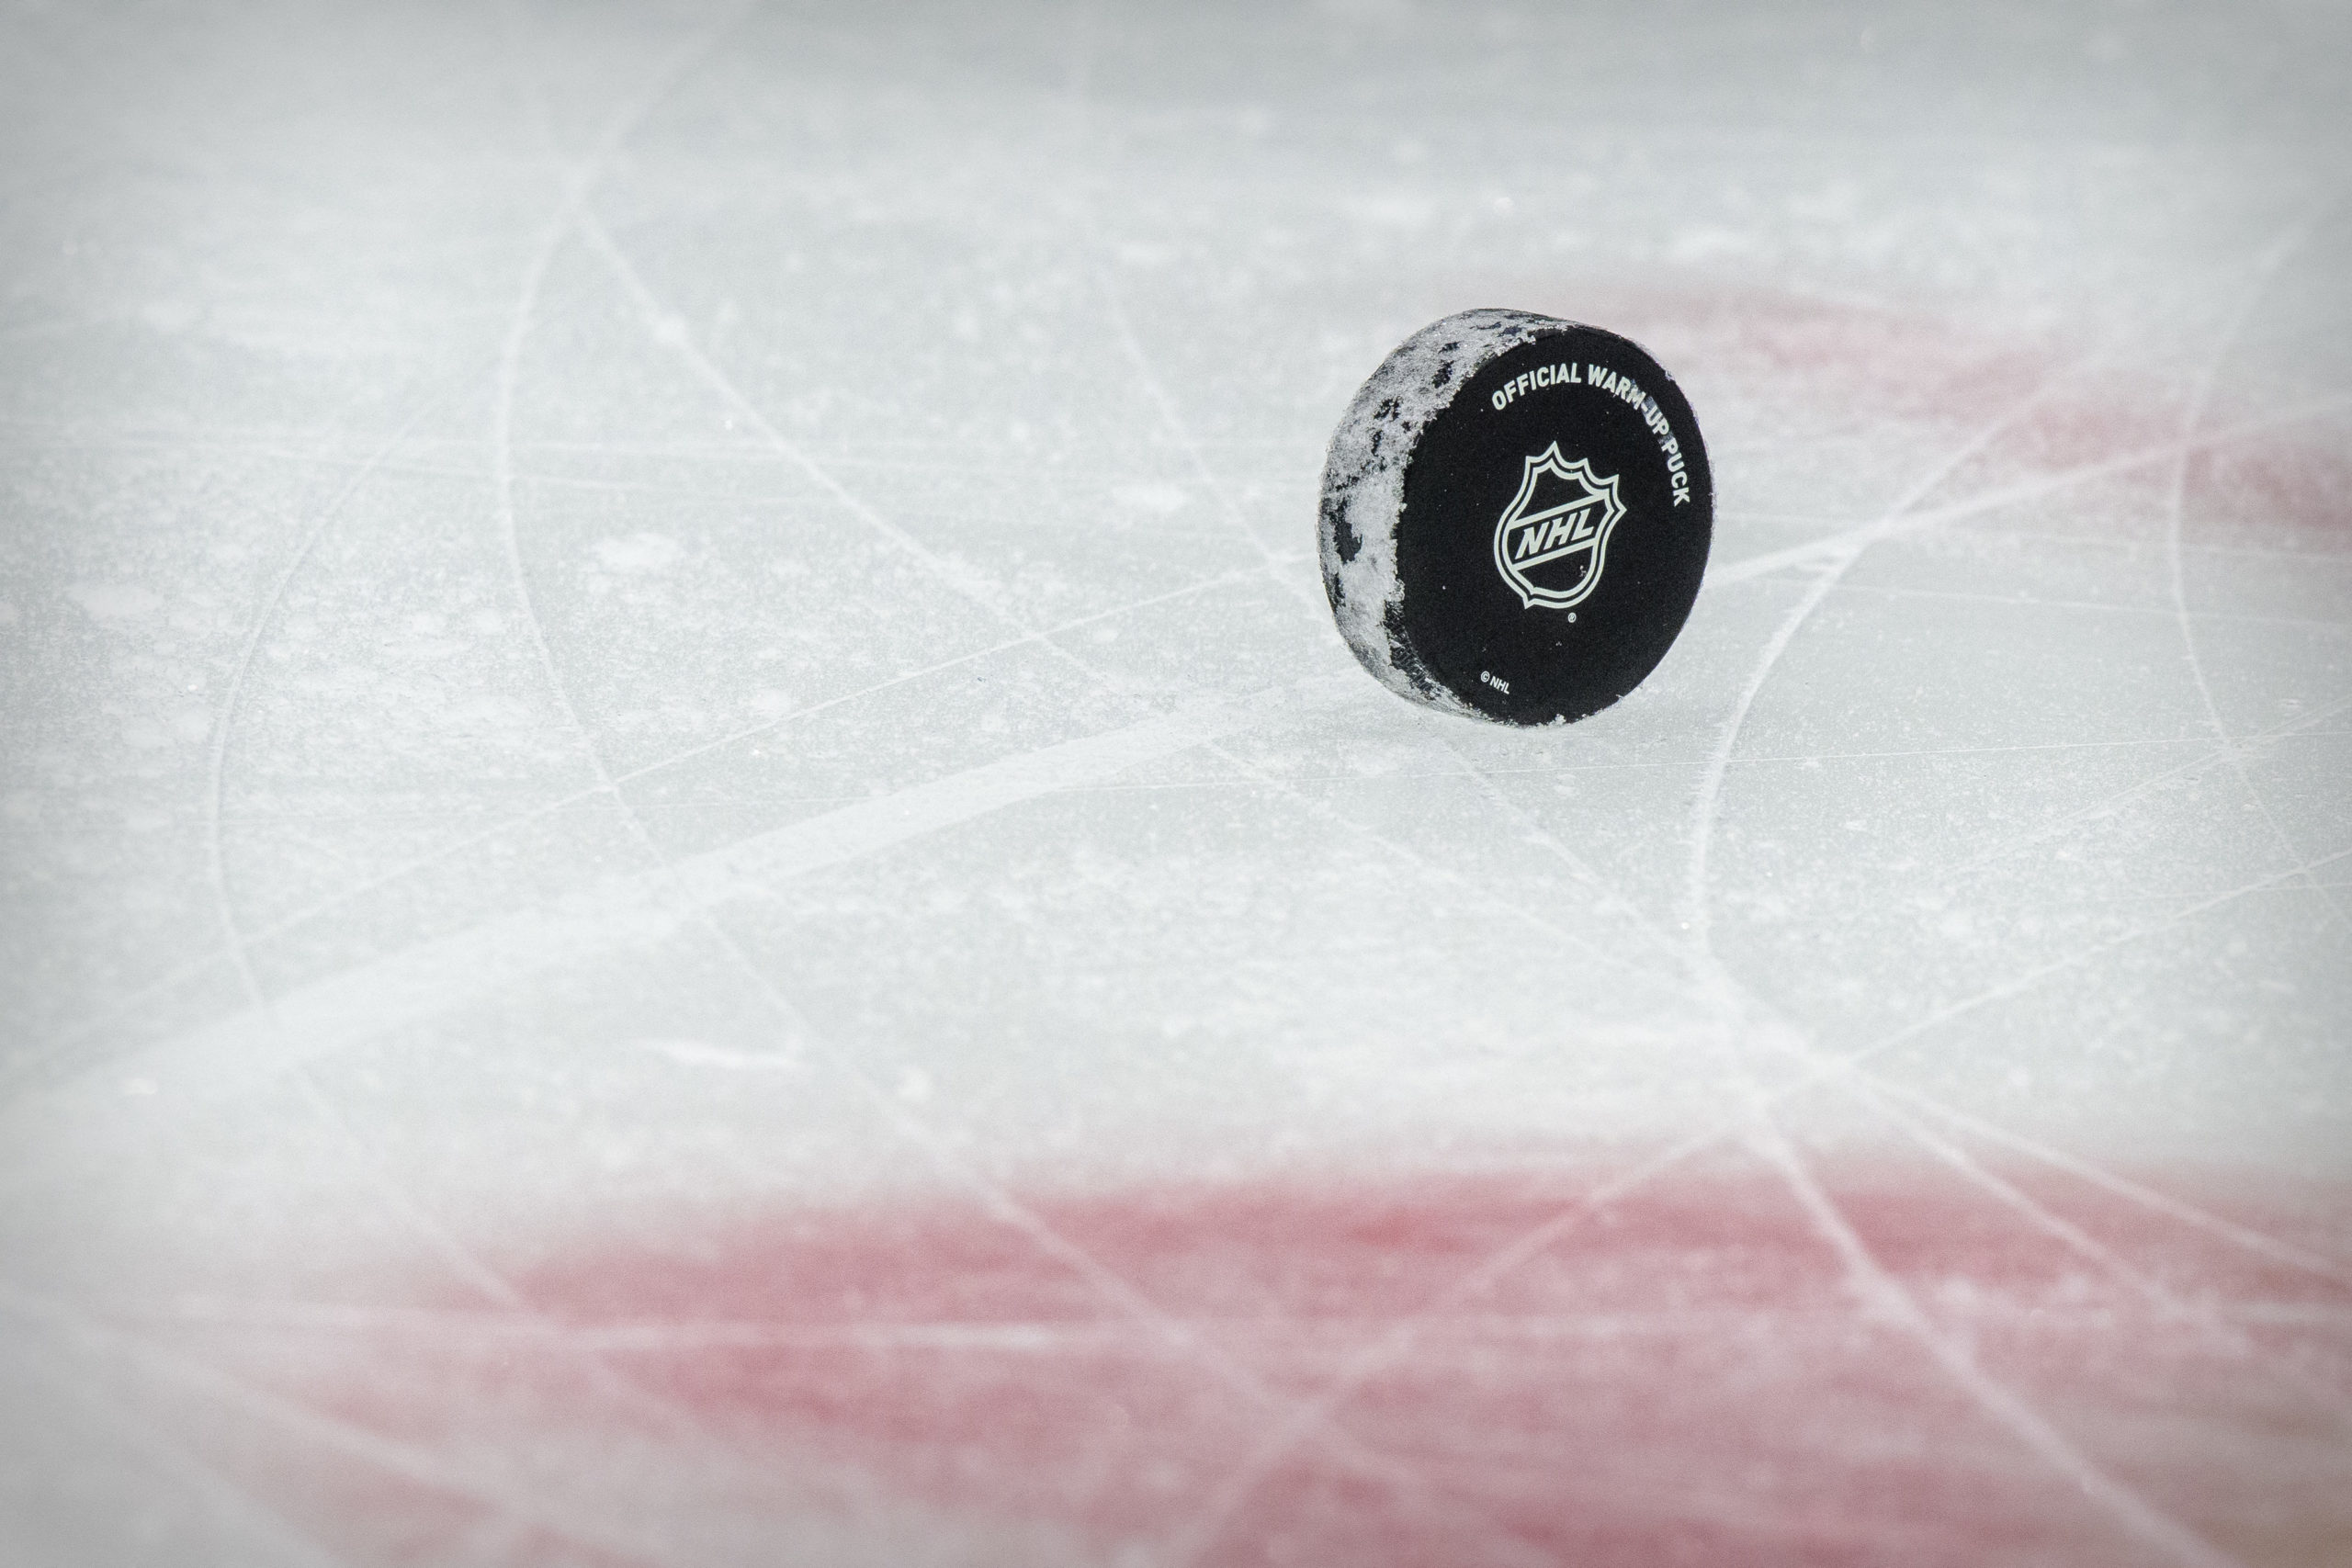 FILE PHOTO: Jan 26, 2021; Dallas, Texas, USA; A view of a puck and the NHL logo and the face-off circle before the game between the Dallas Stars and the Detroit Red Wings at the American Airlines Center. 